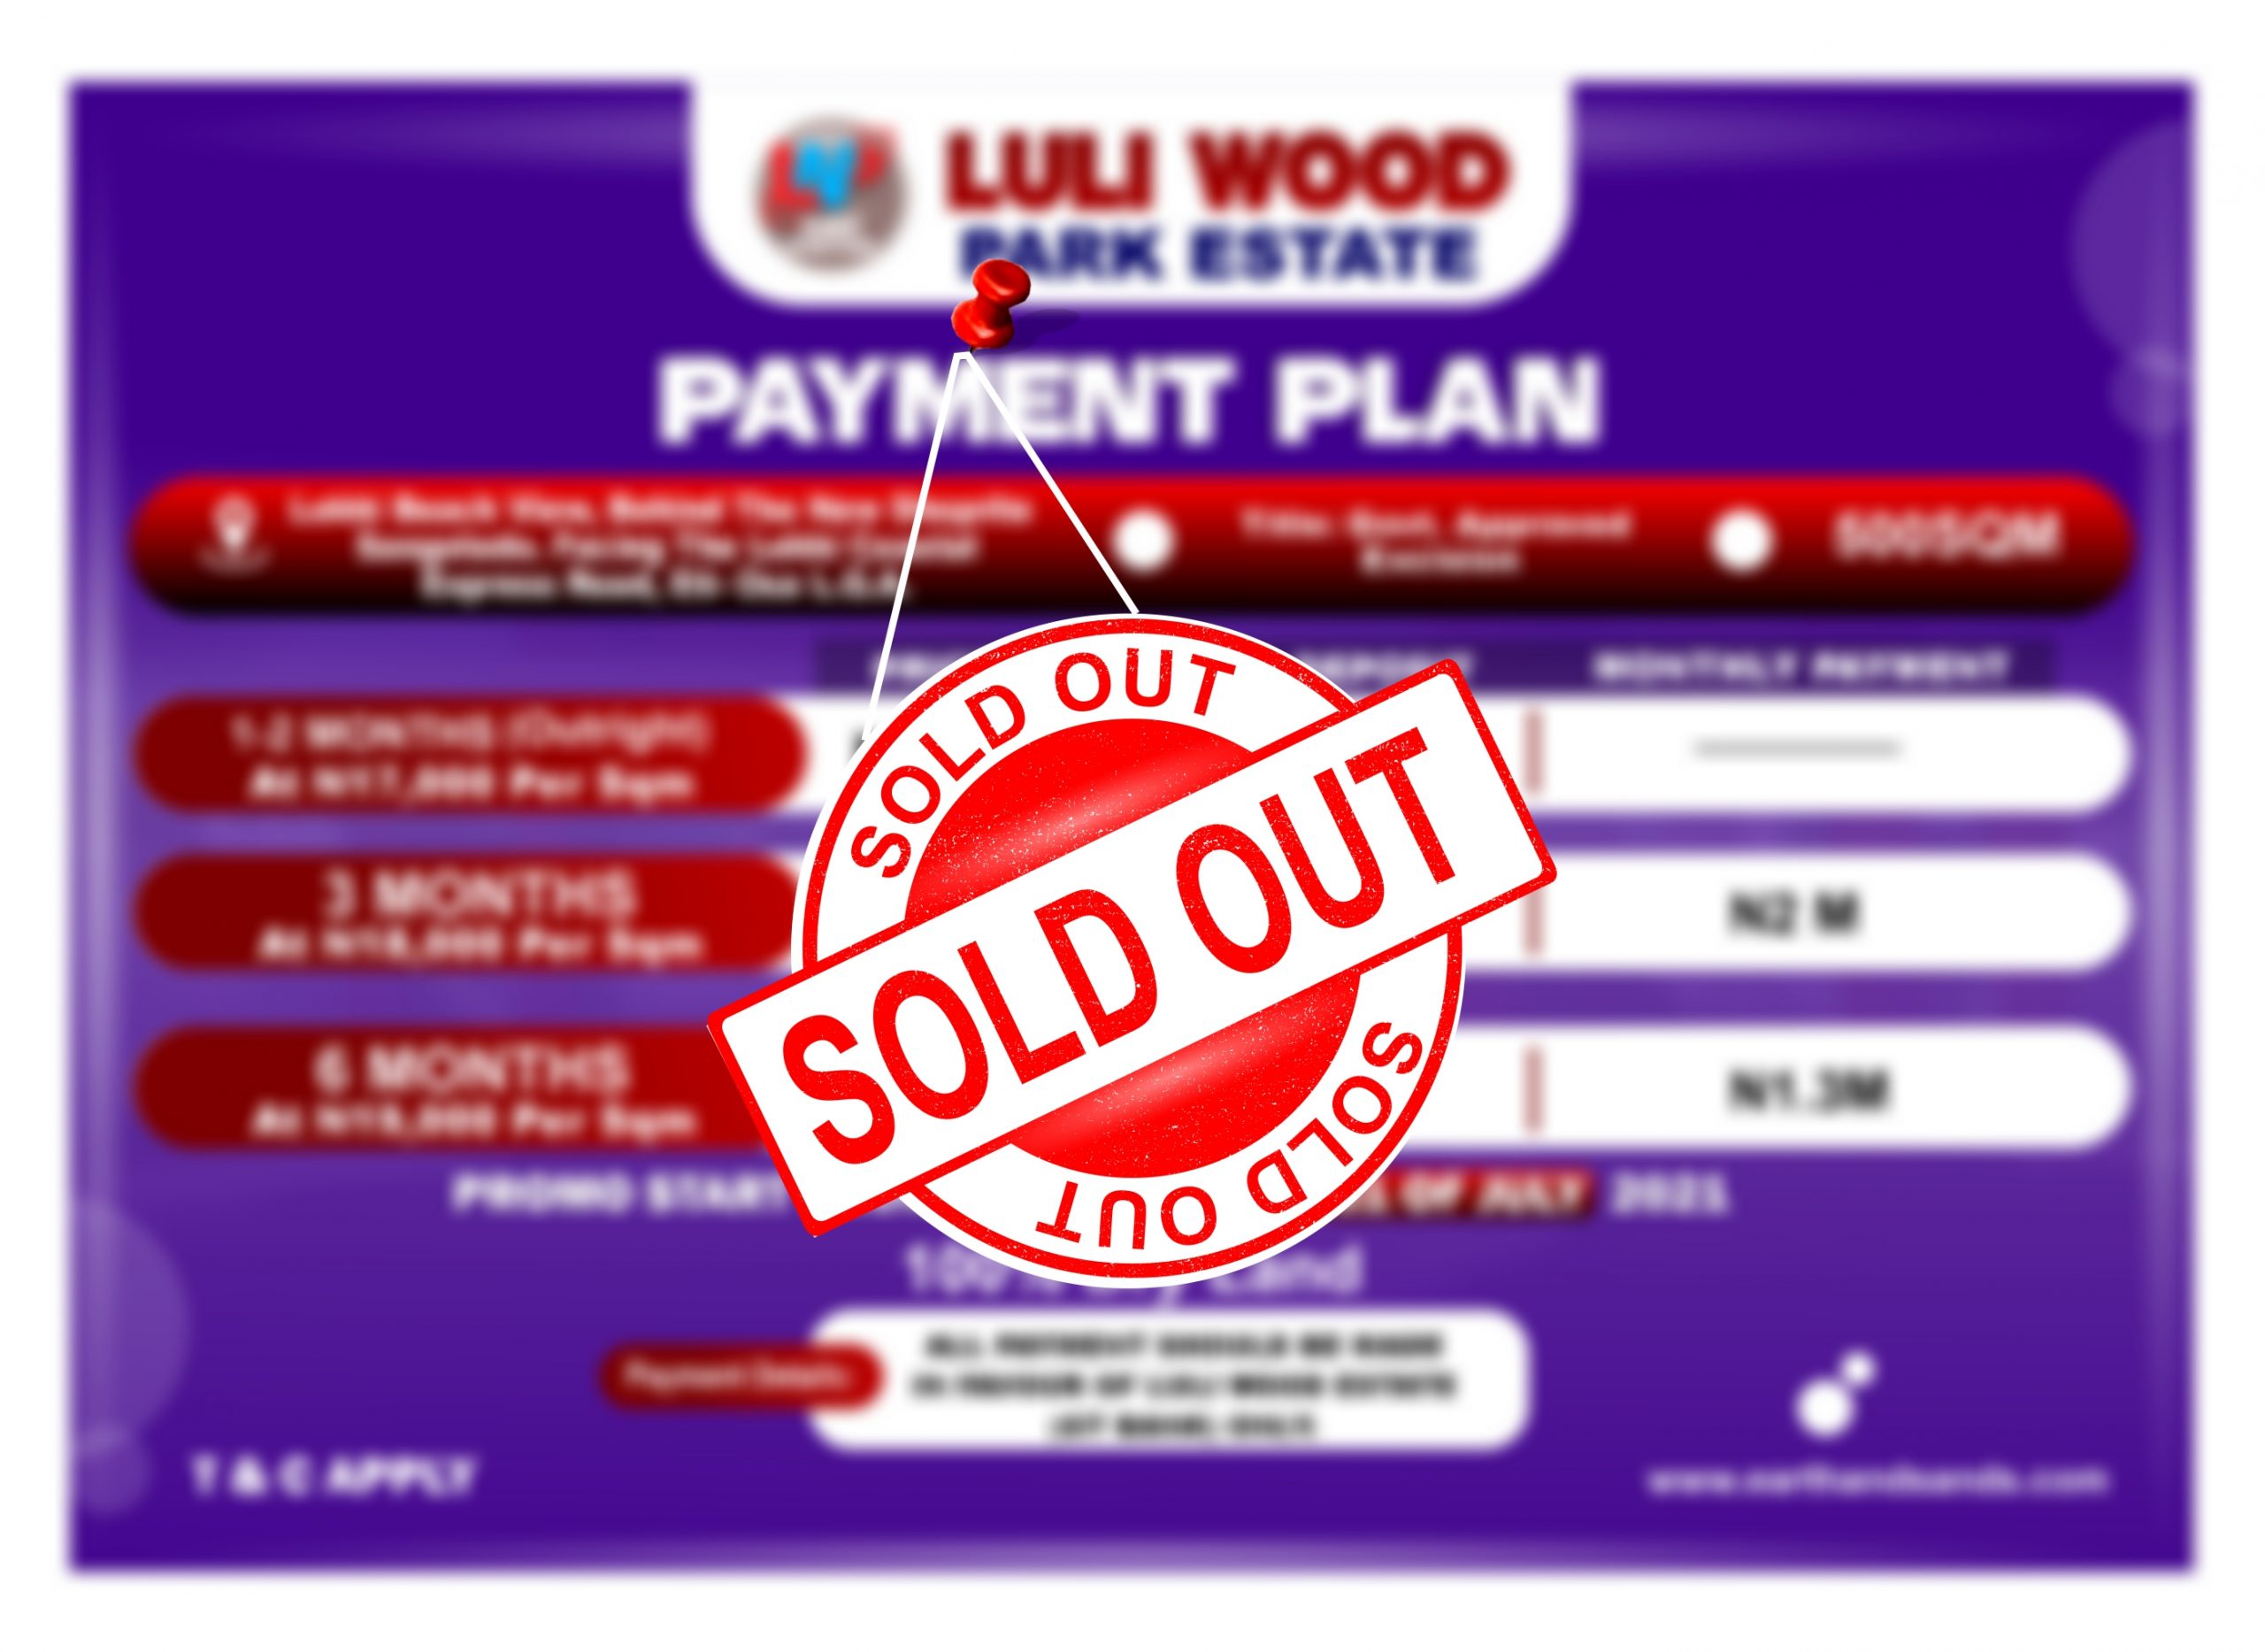 PAYMENT PLAN SOLD OUT